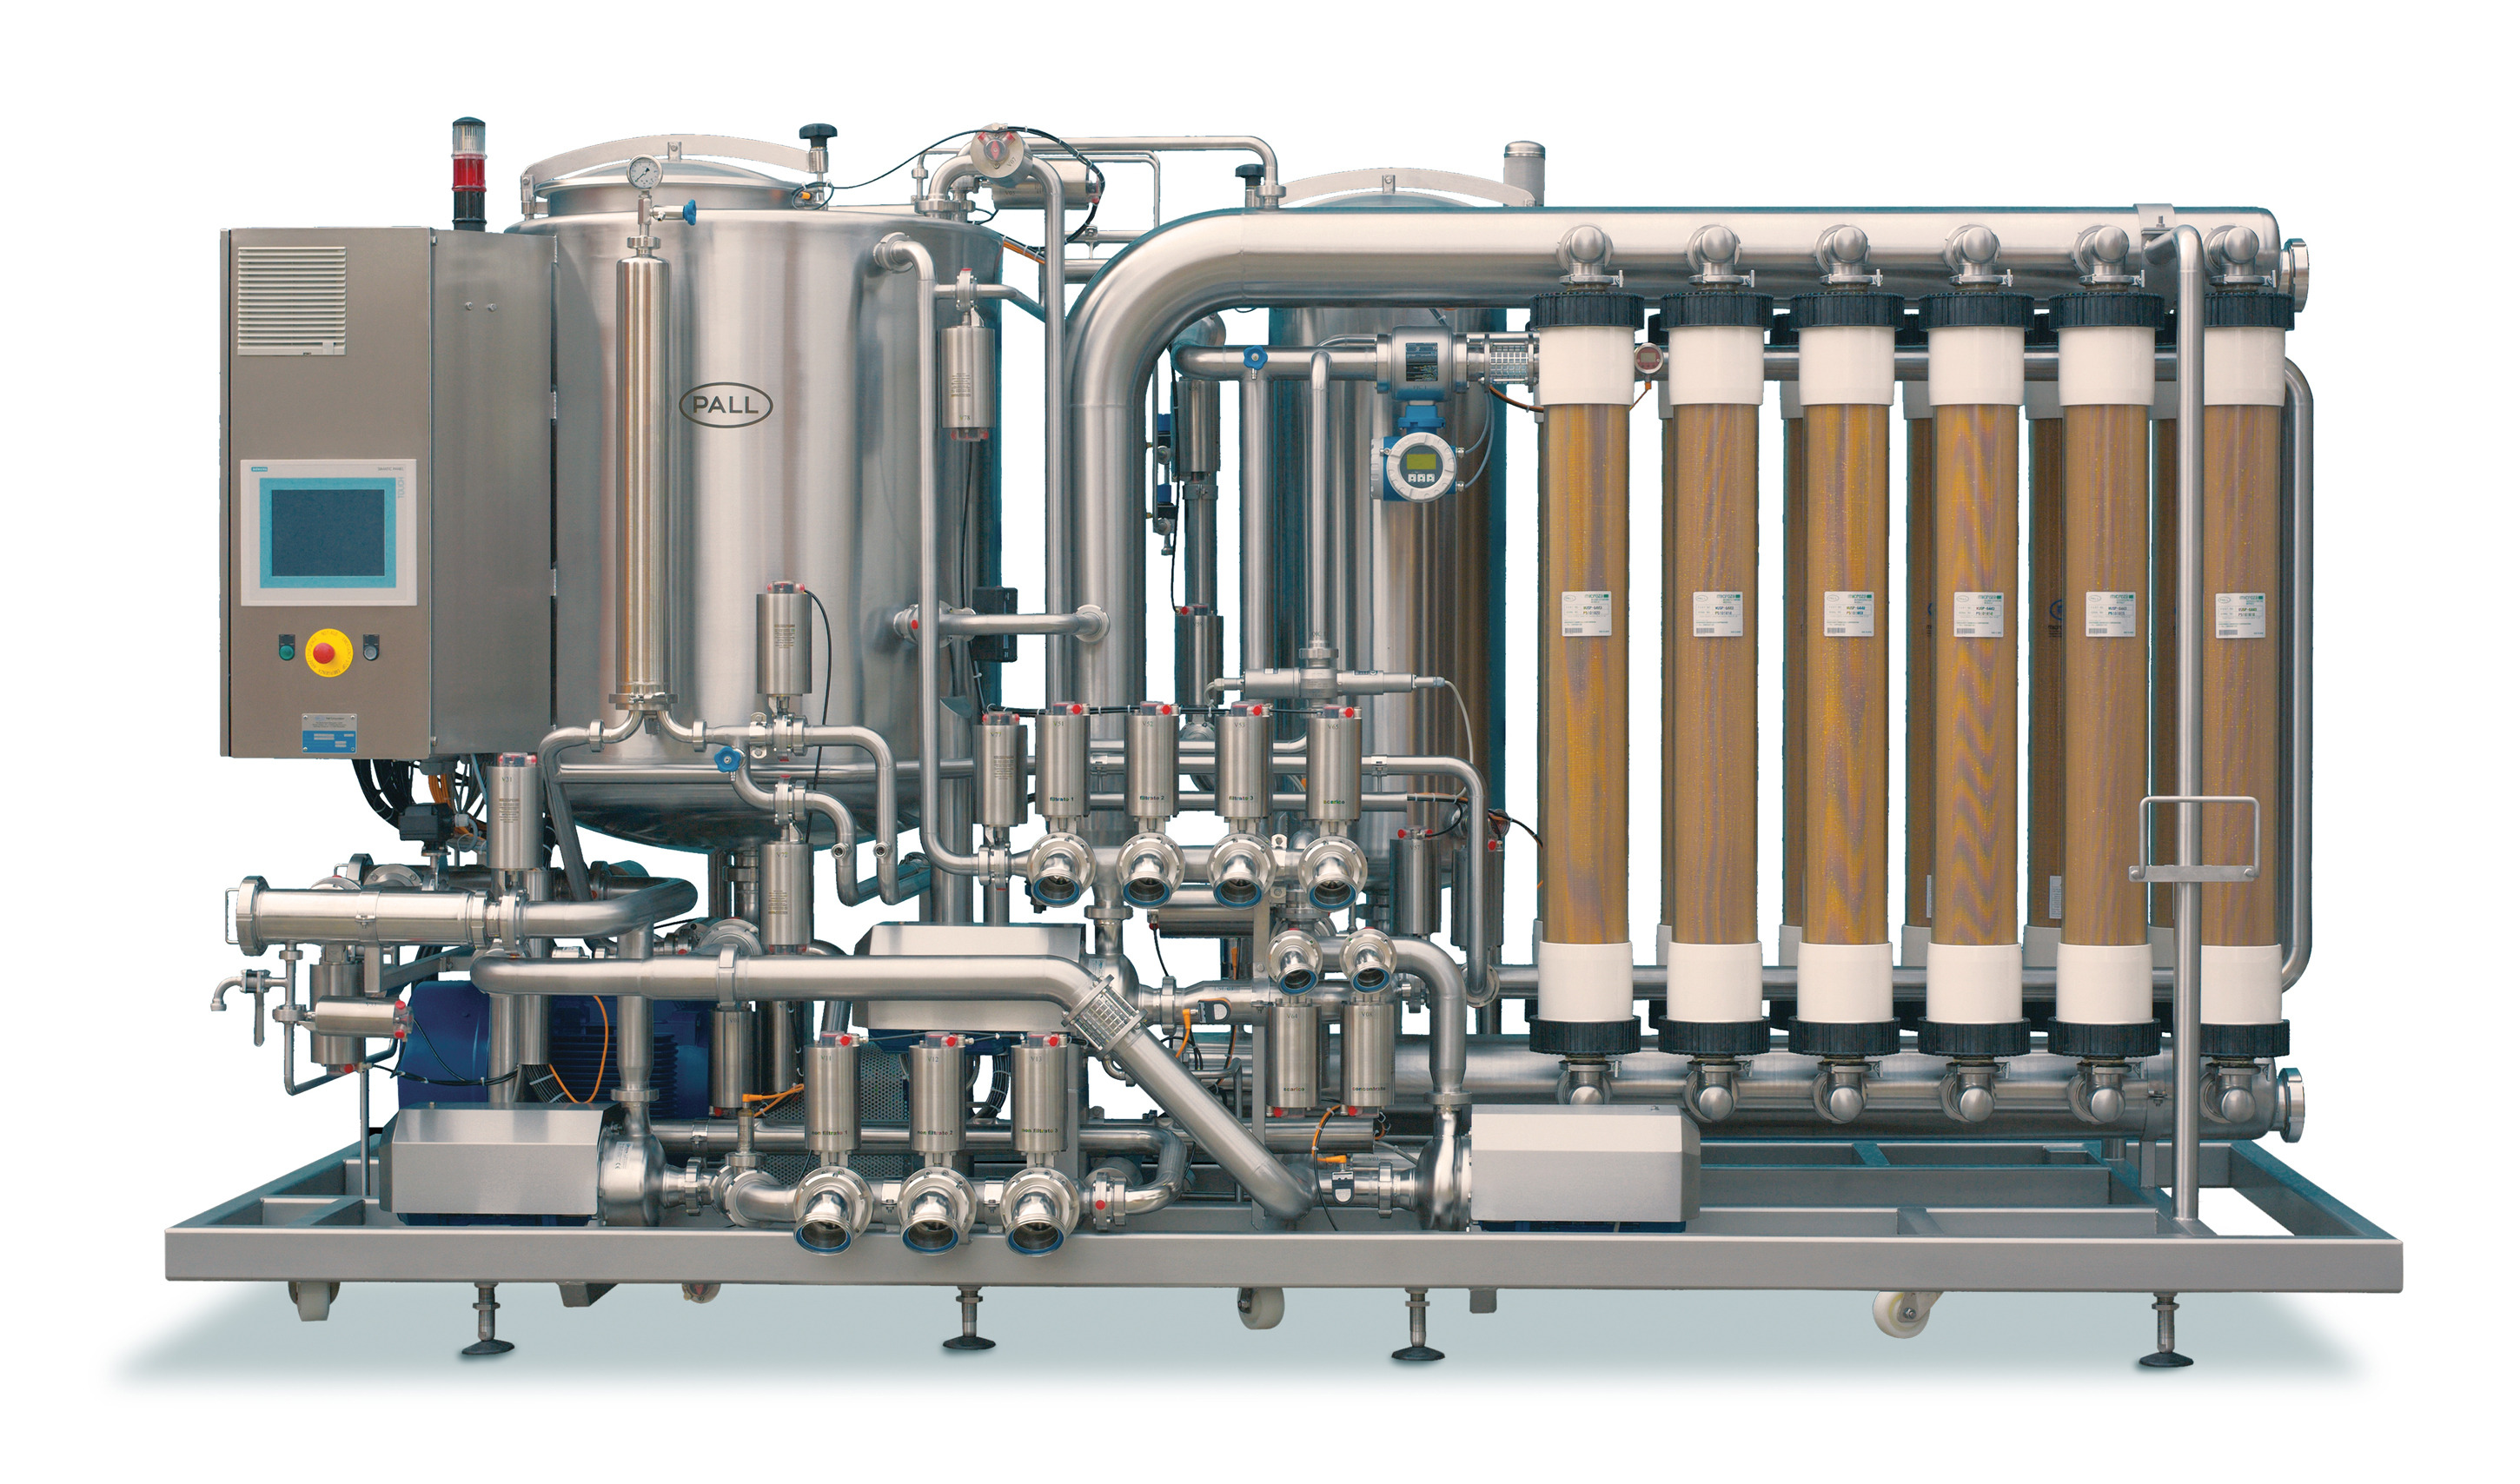 Pall Corp. Celebrates Sale of 1,000th Oenoflow? Filtration System to the  Wine Industry | Business Wire